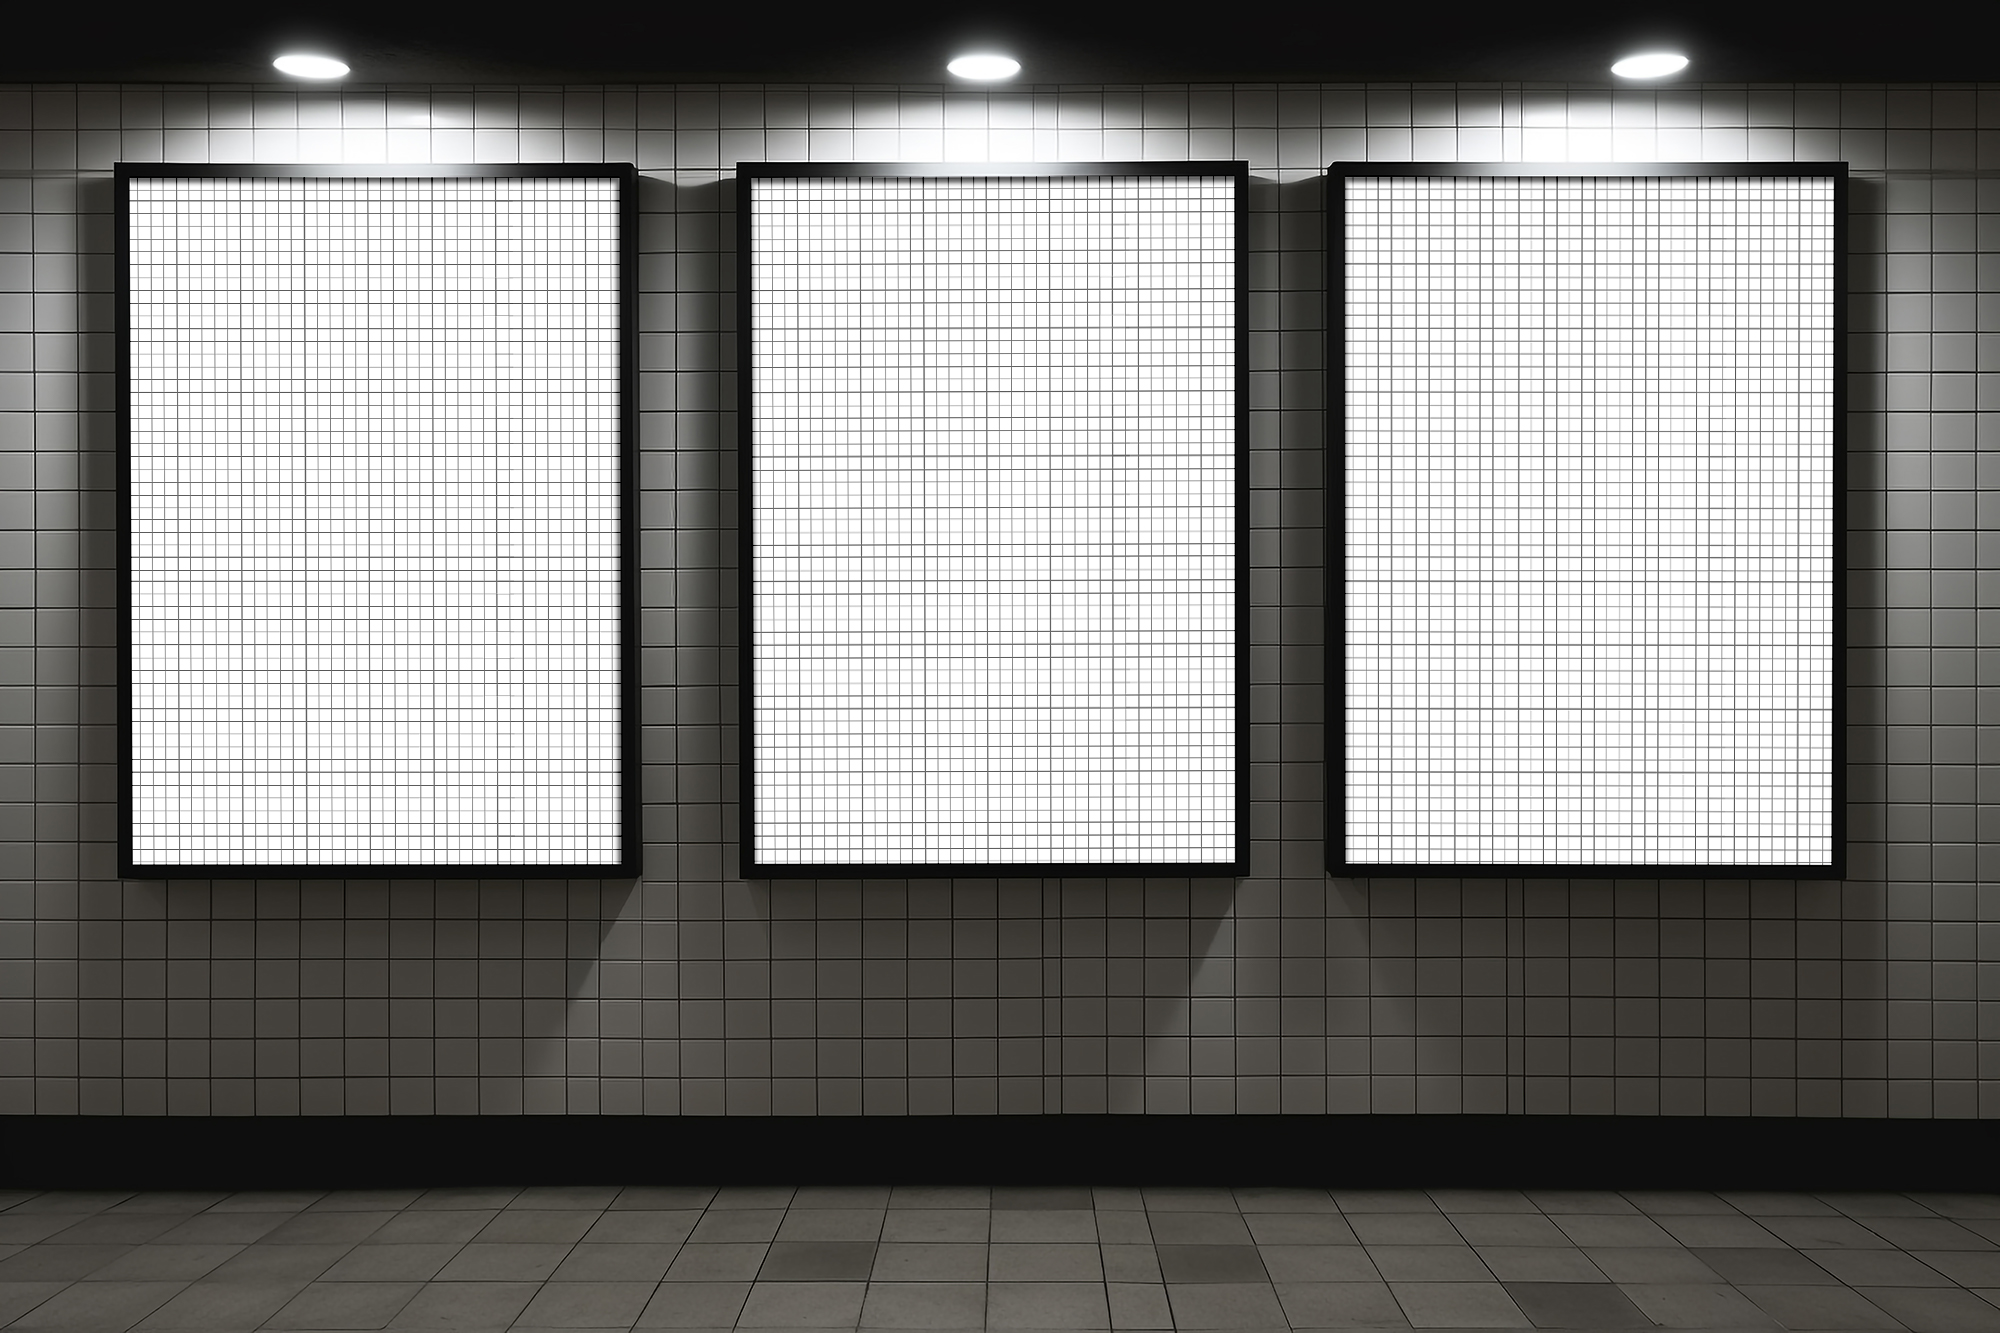 Free Download Billboard Mockups in Metro Station Front View grid